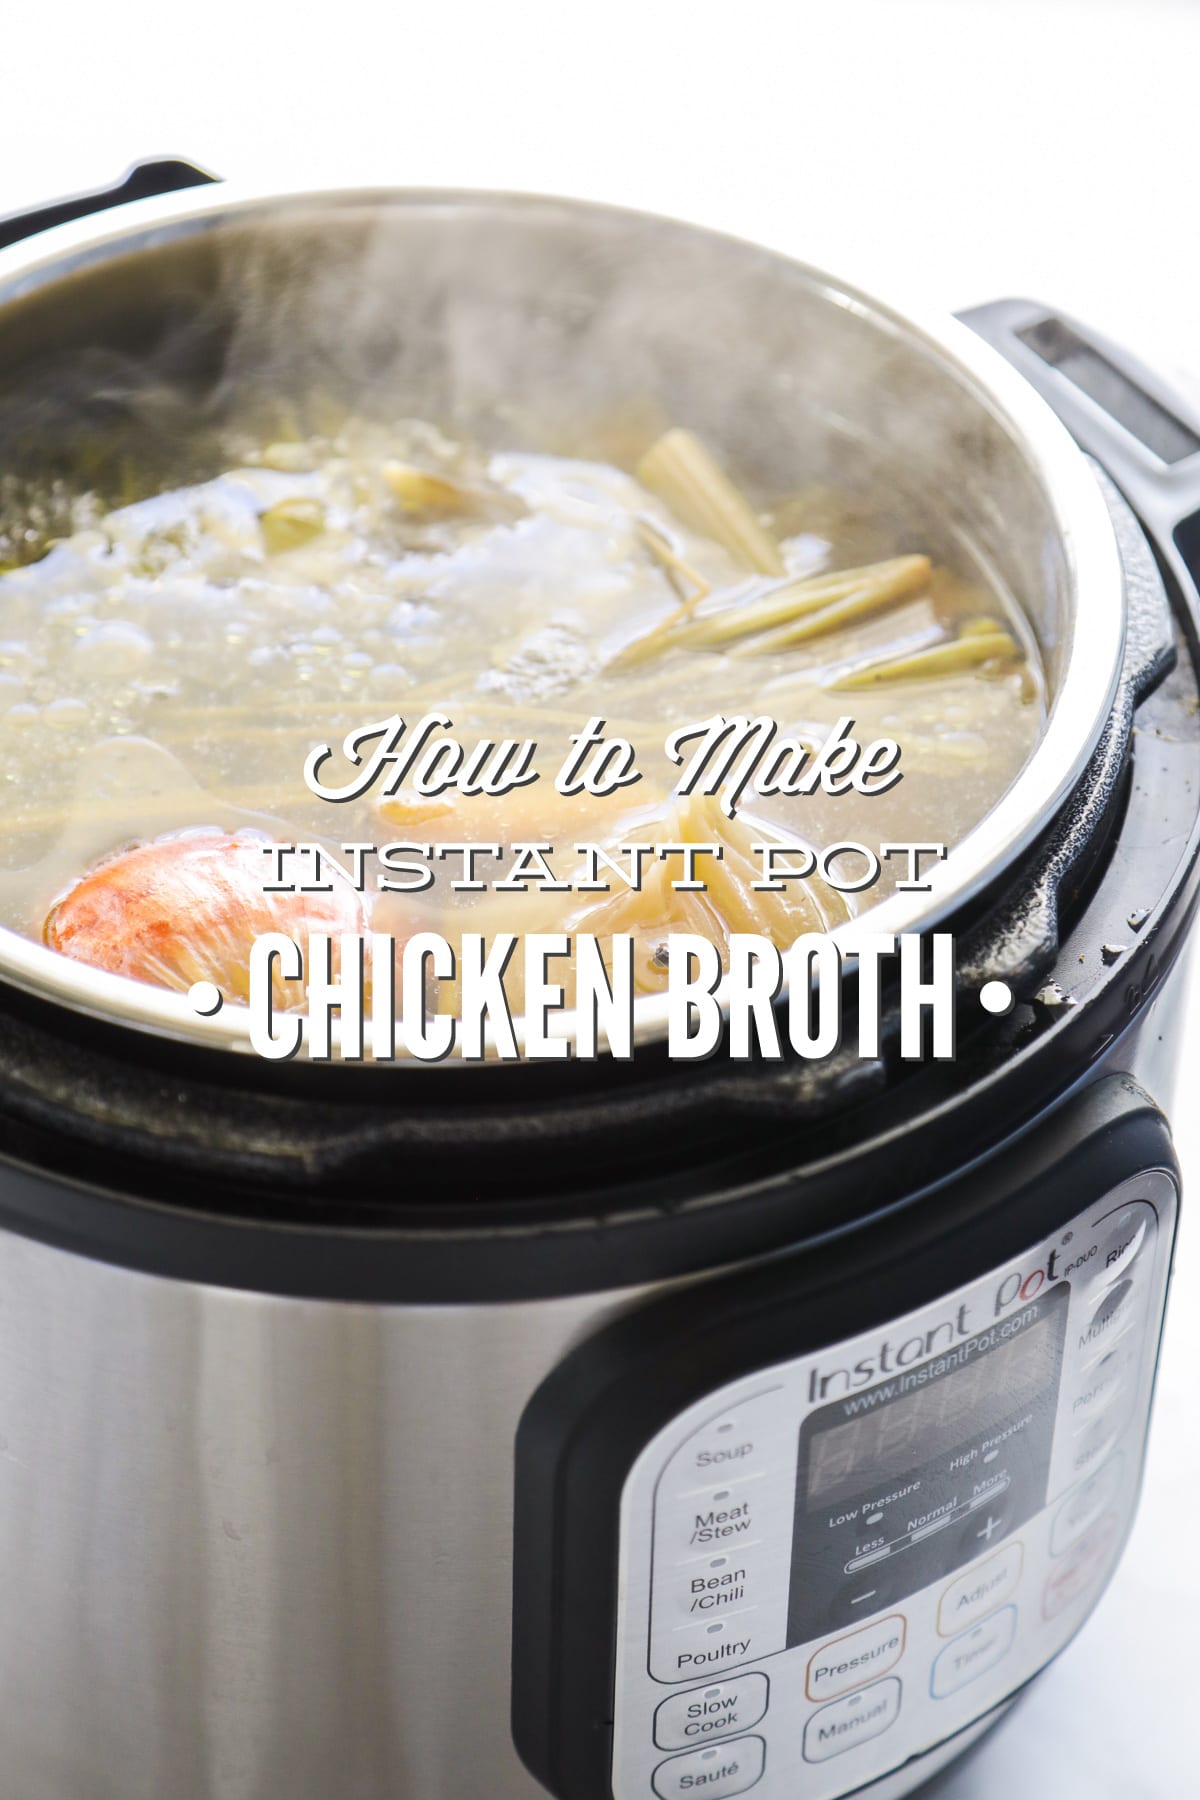 How to Make Chicken Stock in the Instant Pot (Pressure Cooker Recipe)